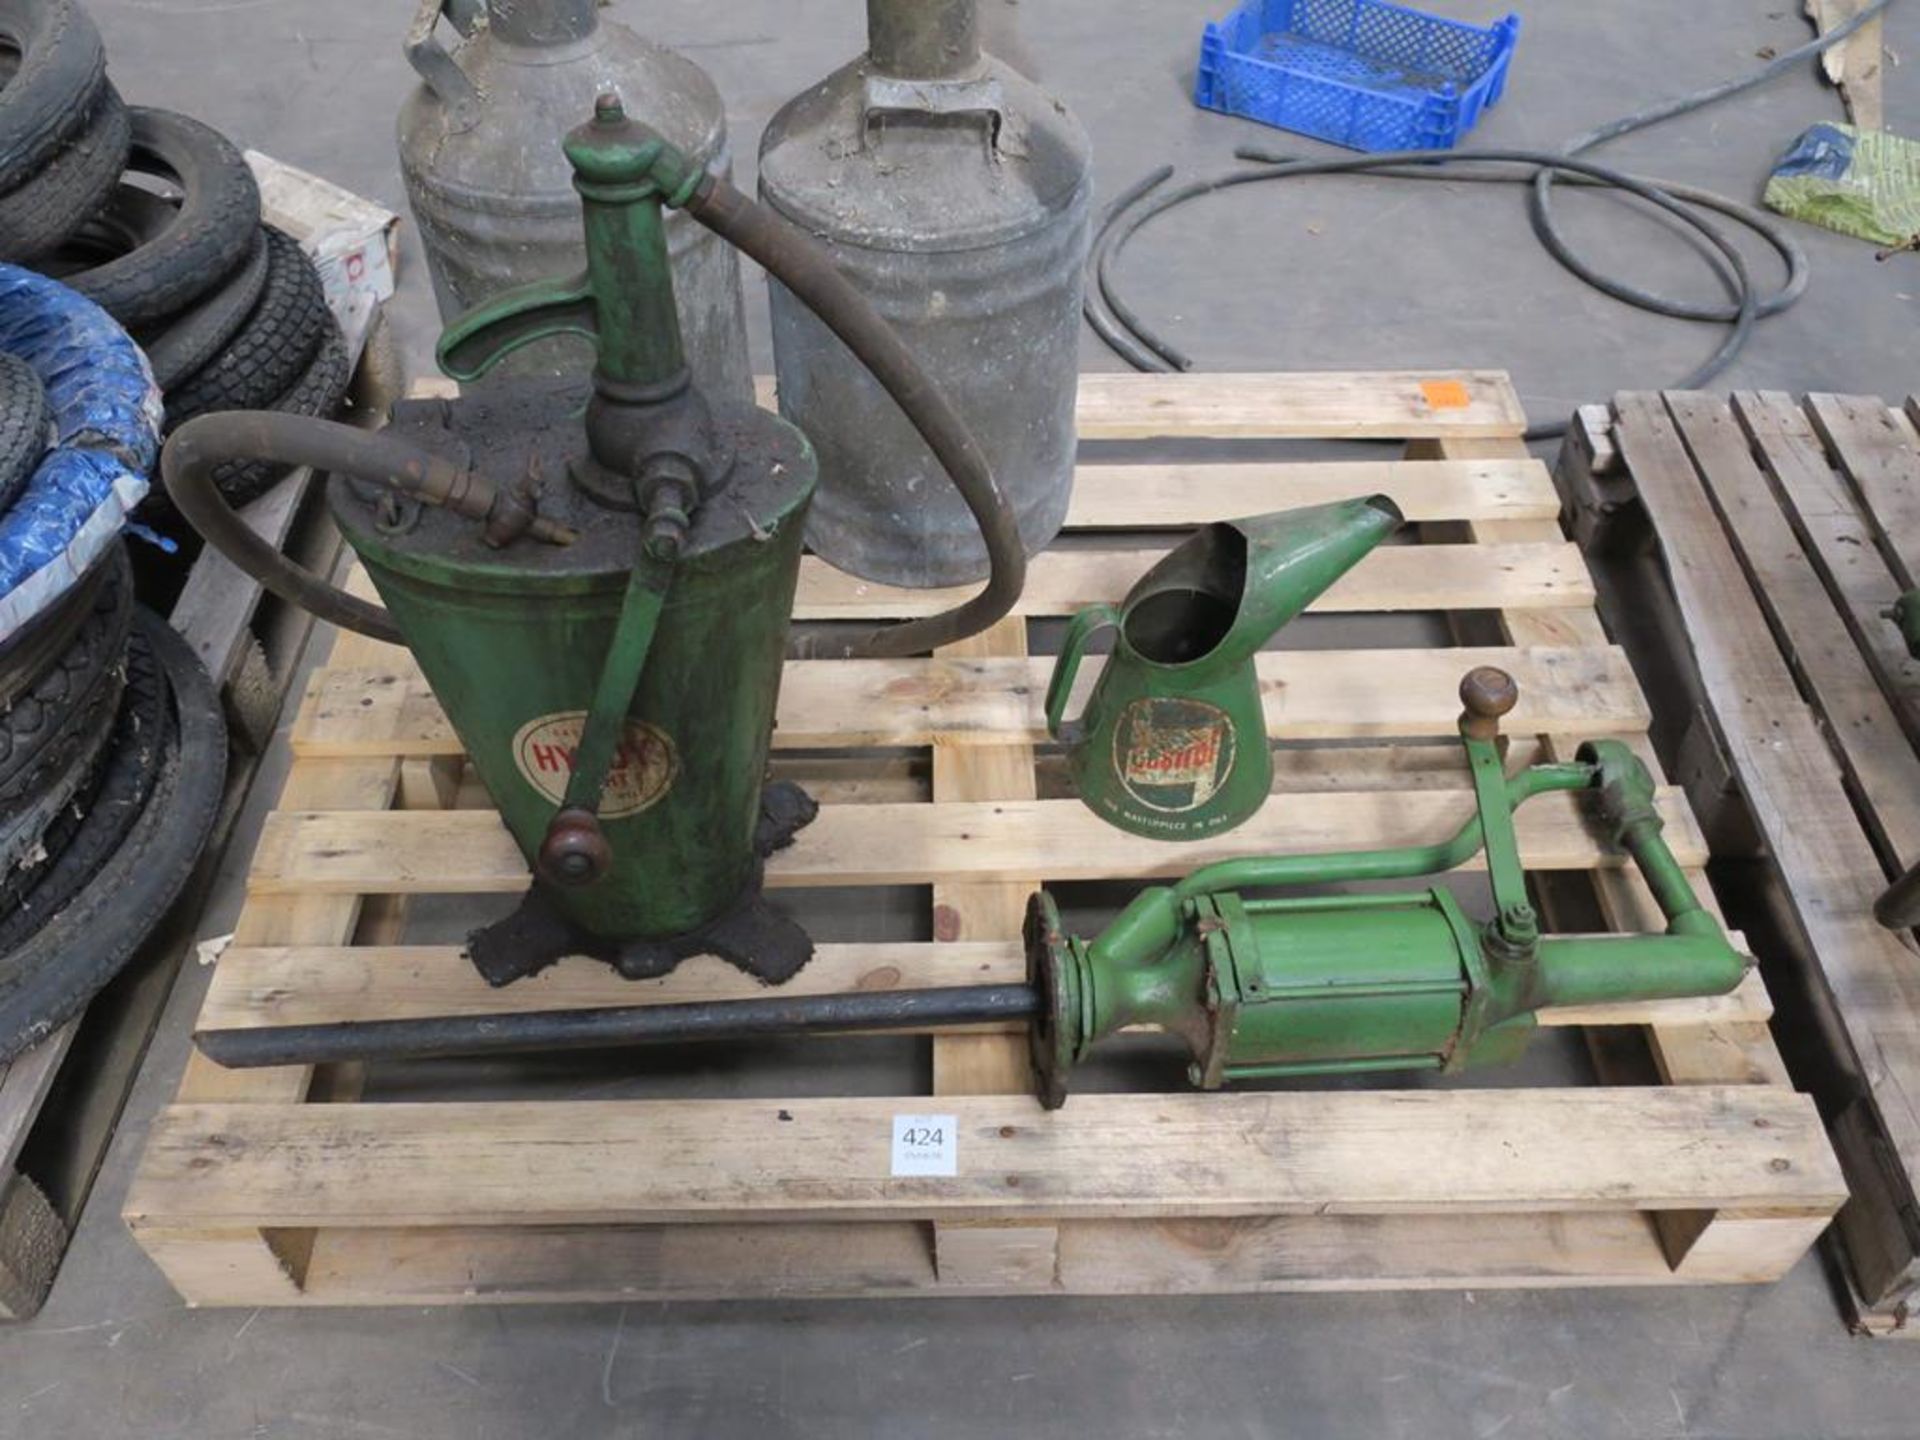 A Set of 3 Vintage Castrol items to include Gear Oil Pump, Oil Tin/Pourer and a Barrel Pump and Tank